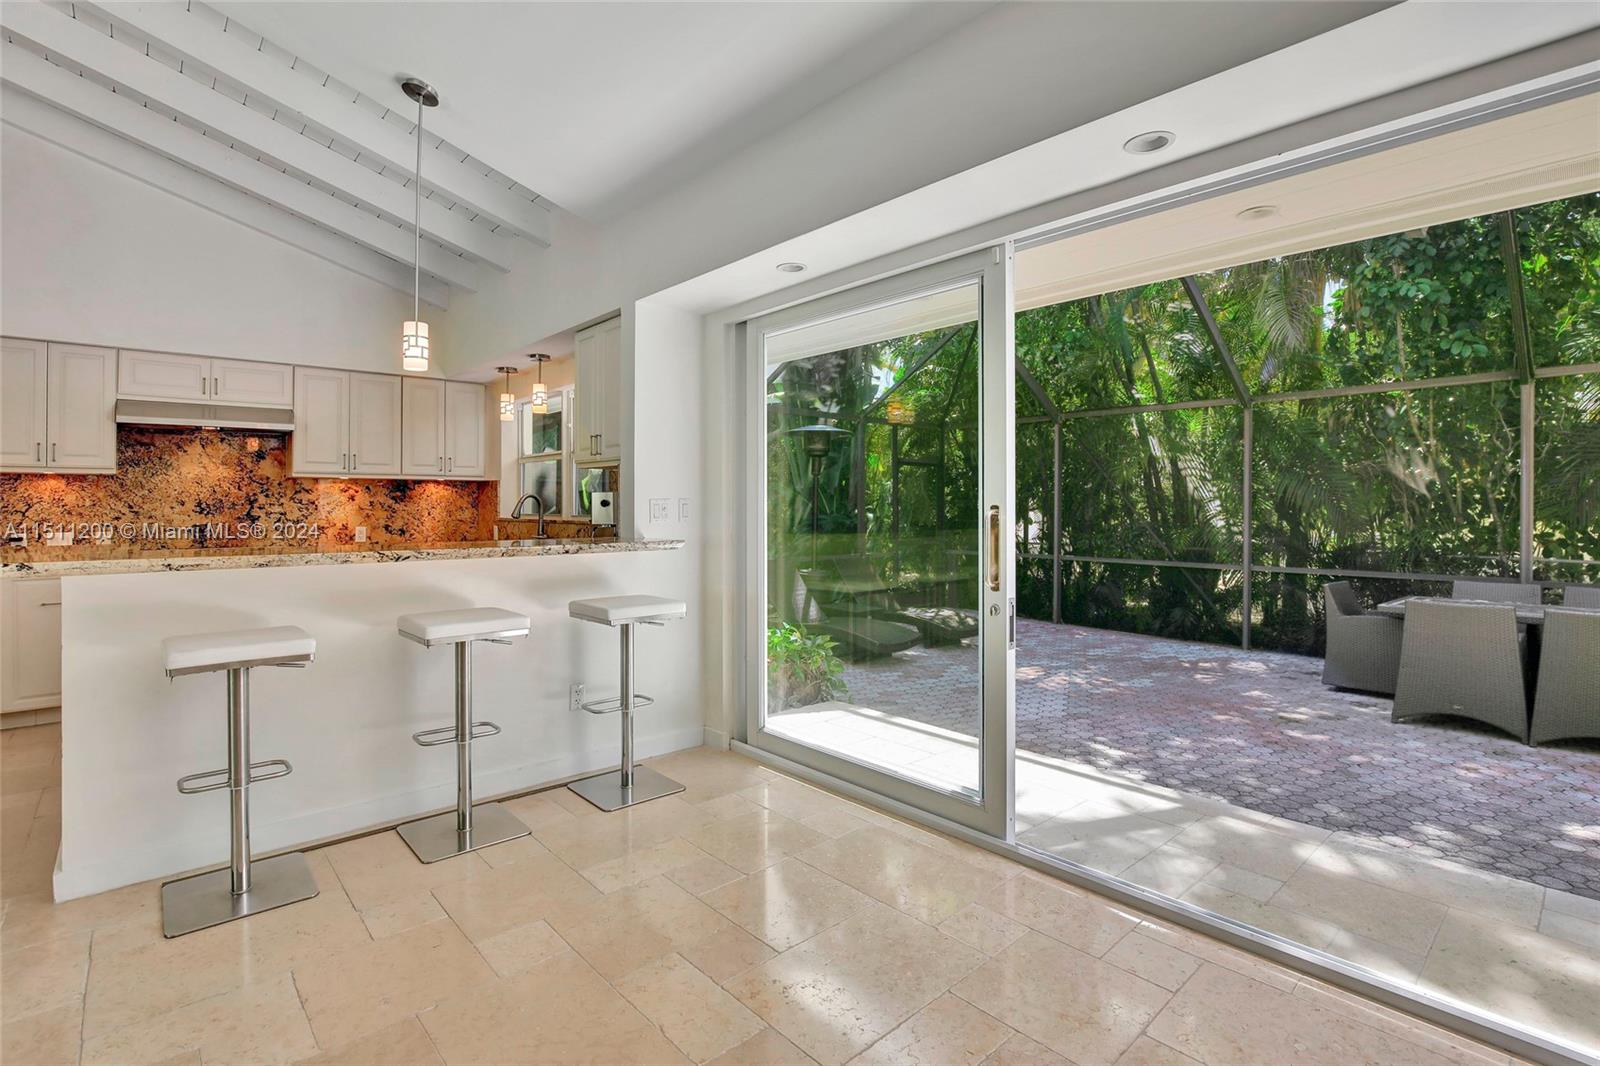 A TOTALLY REMODELED, CUSTOM BUILT HOME ON AN ALMOST 12,000 SQ FT PROPERTY CONSISTING OF ONE AND A HALF LOTS SPANNING OVER 130 FEET OF PRESTIGIOUS HARBOR DRIVE. THIS BEAUTIFUL HIGH ELEVATION 4 BEDROOM 3 BATH SPLIT PLAN FAMILY HOME IS LOCATED ACROSS FROM BISCAYNE BAY AND JUST DOWN THE STREET FROM THE KEY BISCAYNE YACHT CLUB. JERUSALEM STONE FLOORS THROUGHOUT THE LIVING AND BEDROOM AREAS. THE KITCHEN FEATURES GRANITE COUNTERTOPS AND BACKSPLASH, WOOD CABINETERY AND IS OPEN TO FAMILY ROOM AND DINING AREAS THAT FEATURE 12 FT CATHEDERAL CEILINGS. A SEPARATE LIVING ROOM OVERLOOKS THE HEATED POOL. HOUSE HAS 2959 SQ FT PER ARCHITECT'S DRAWINGS. ROOM FOR CONVERSION TO A MAID'S QUARTERS WITH A SEPARATE ENTRANCE. NEW ROOF IN 2019. ATTACHED ELEVATION CERTIFICATE (8.1 FT) AND SURVEY (11,524 SQ FT)